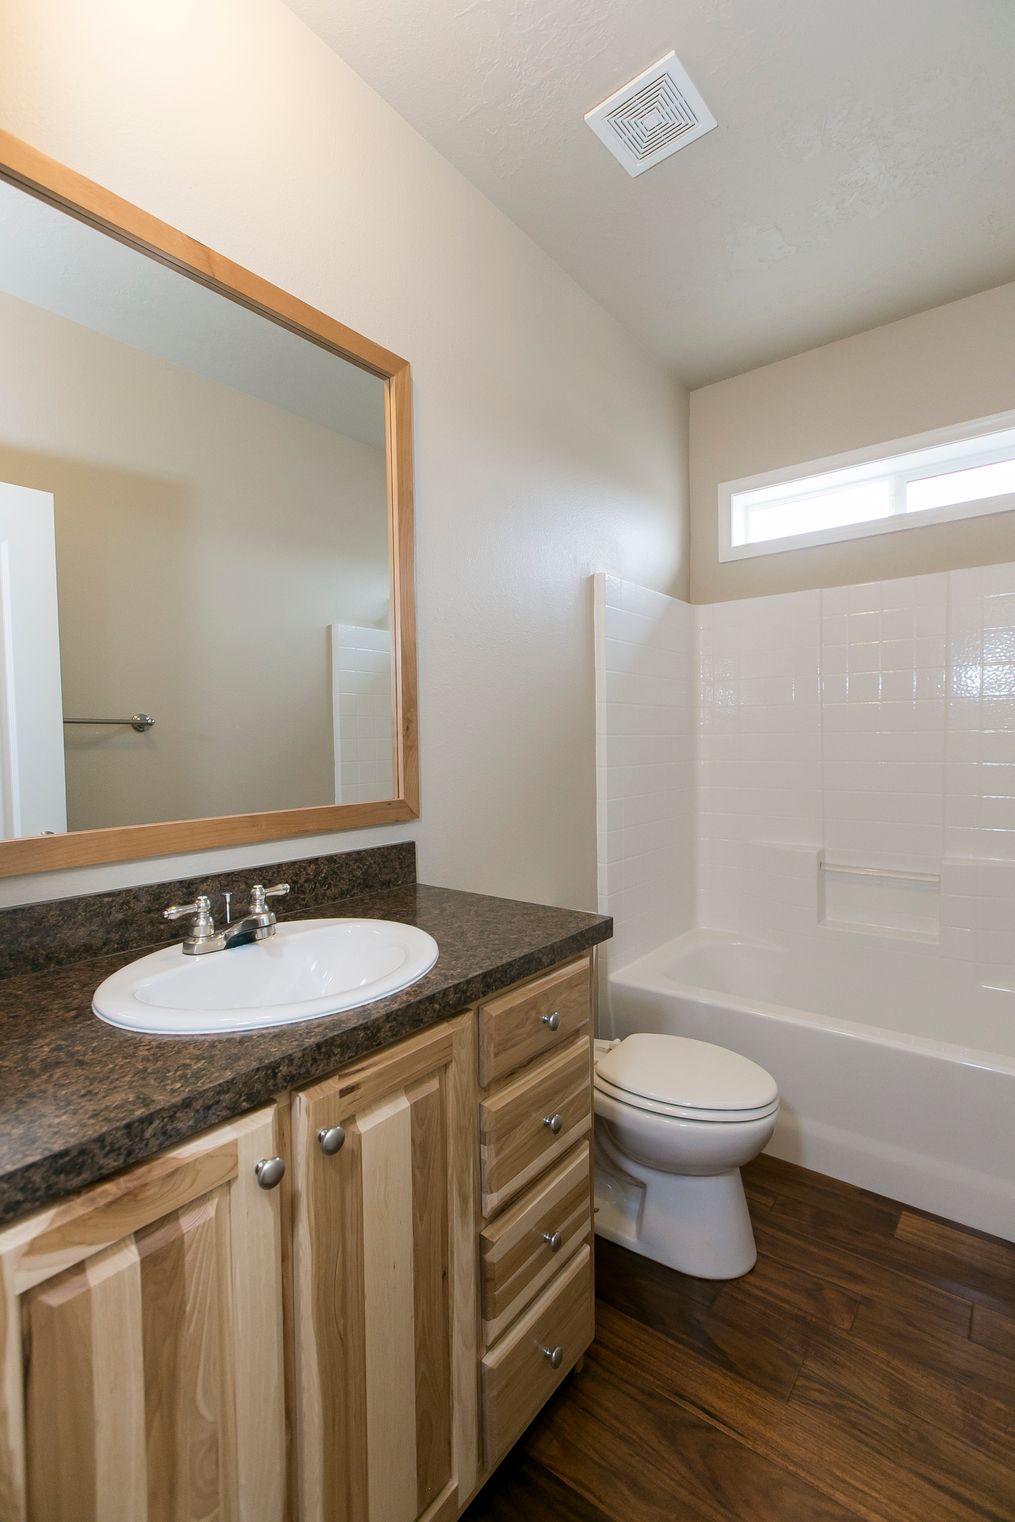 The THE SPRUCE Guest Bathroom. This Manufactured Mobile Home features 3 bedrooms and 2 baths.